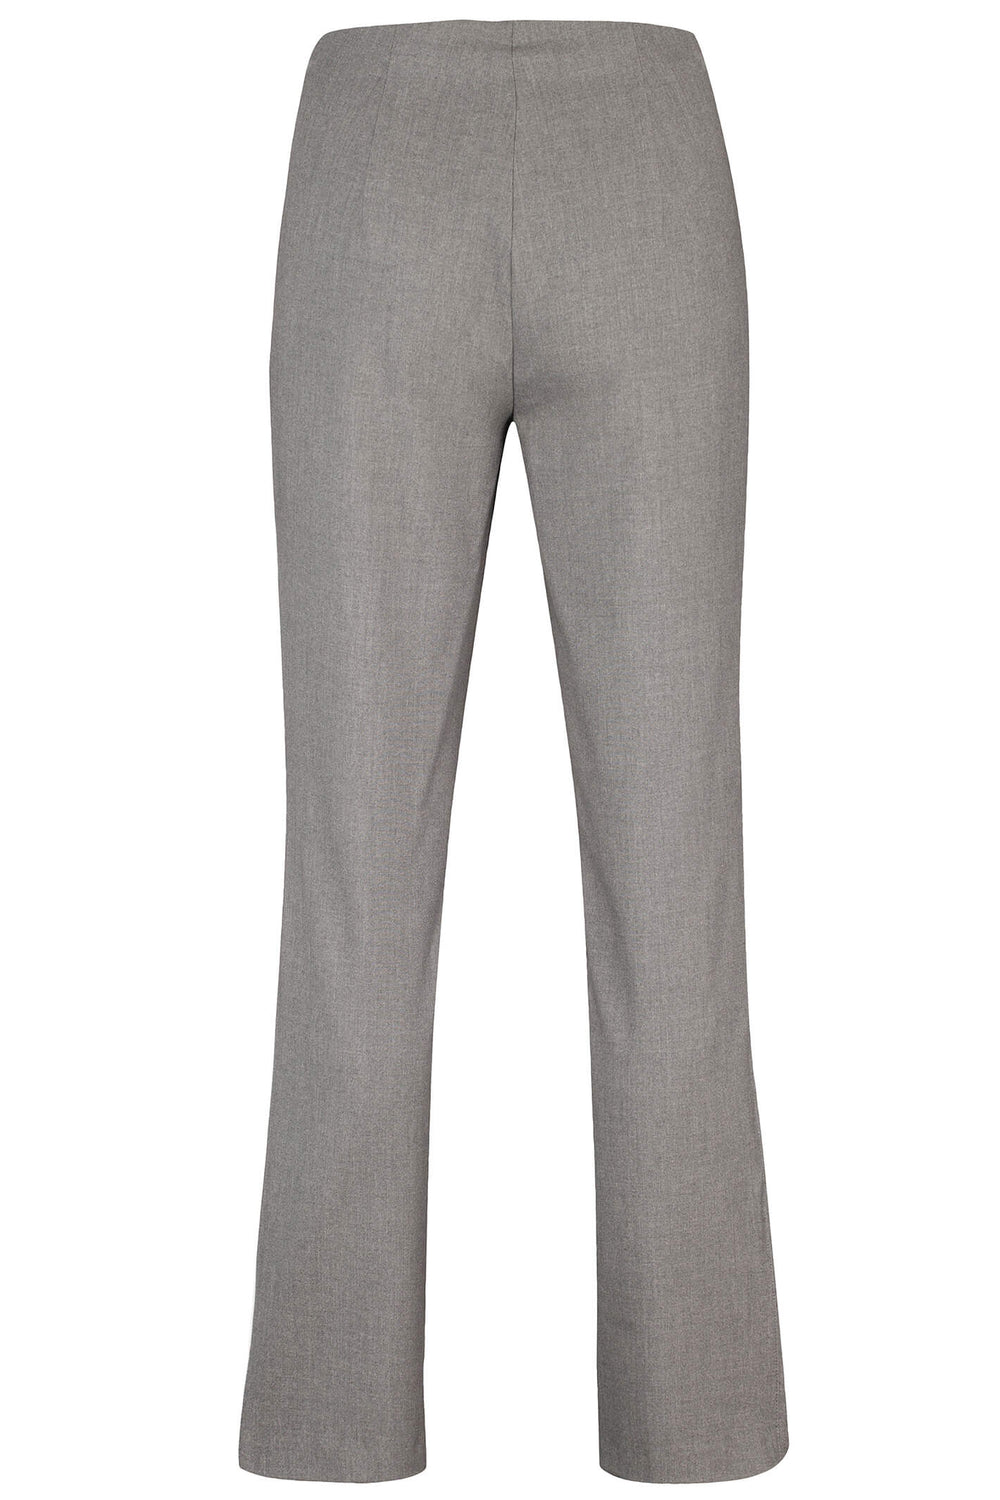 Robell 51408 197 Pewter Grey Jacklyn Woven Stretch Trousers - Experience Boutique